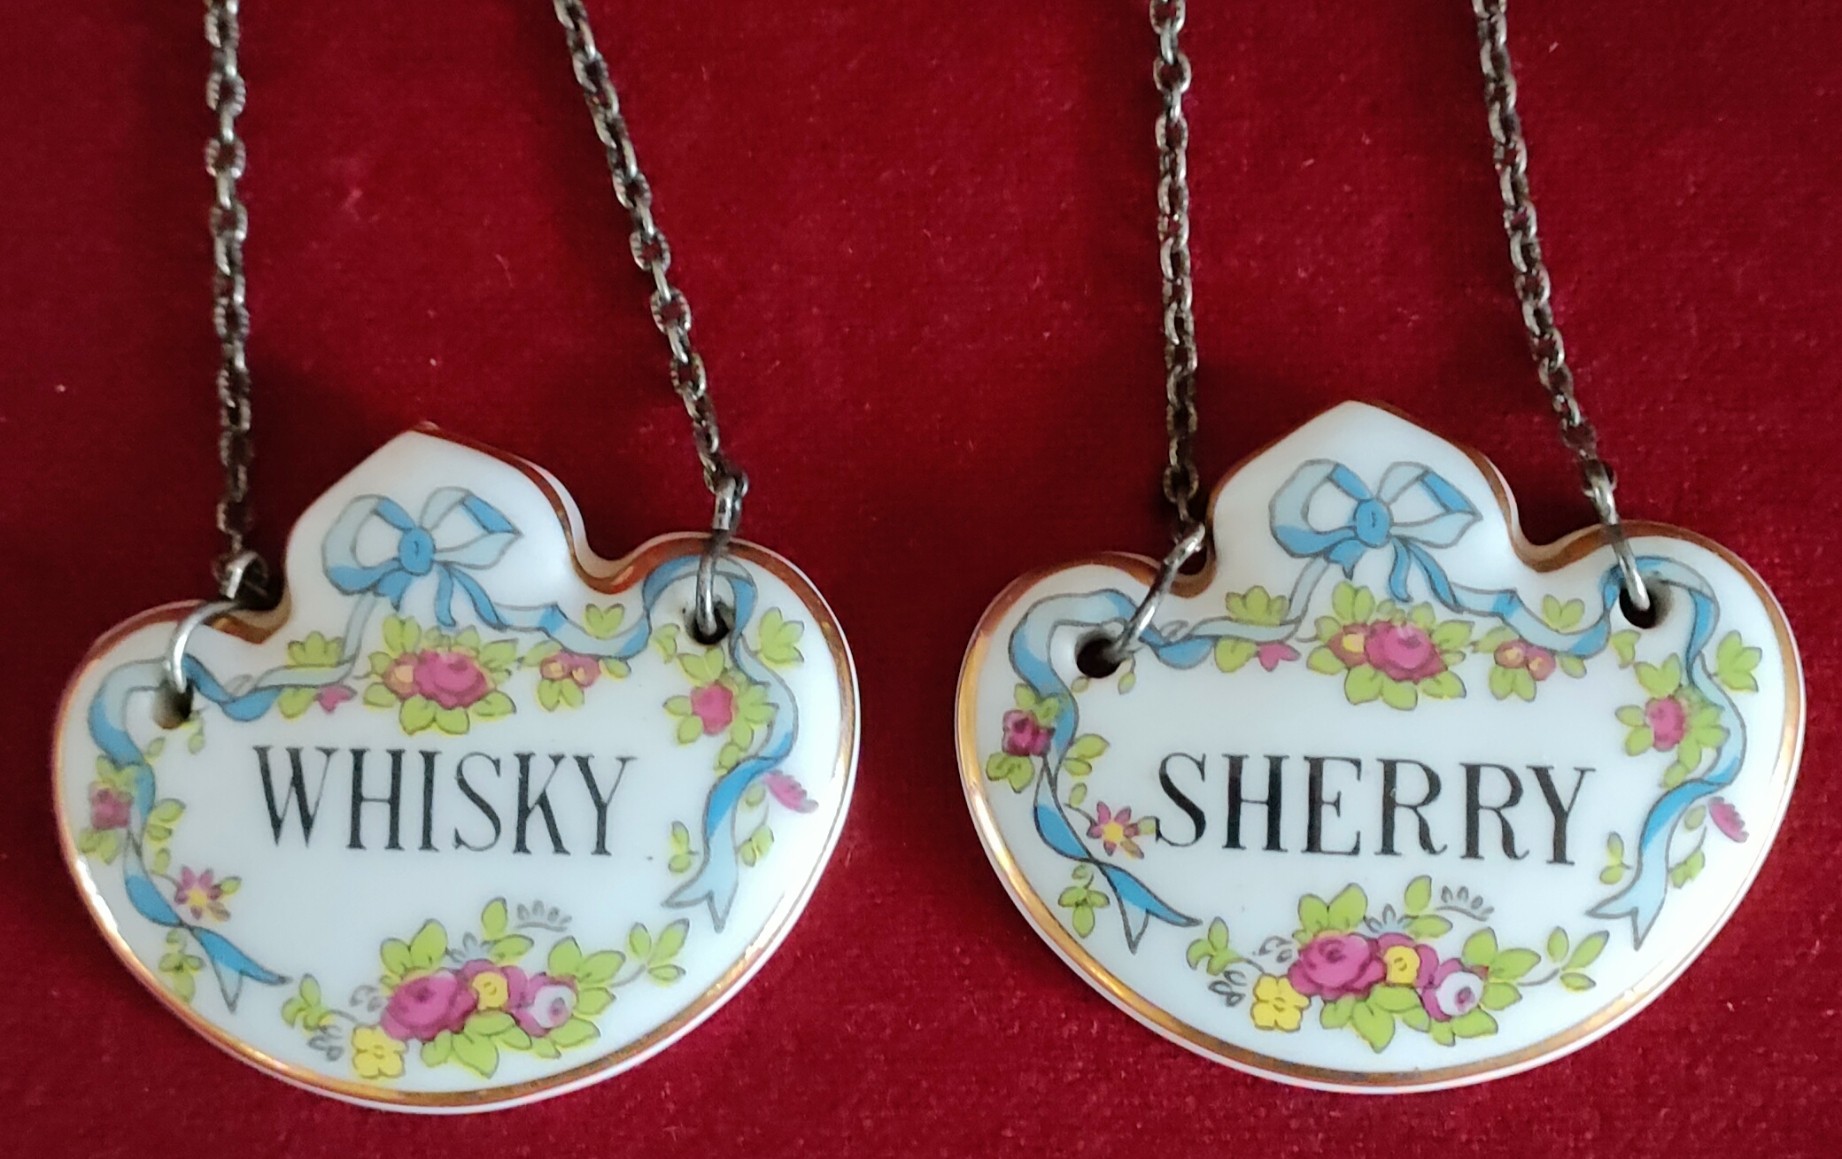 TWO CERAMIC ENAMELLED DRINK'S LABELS REASONABLE, USED CONDITION